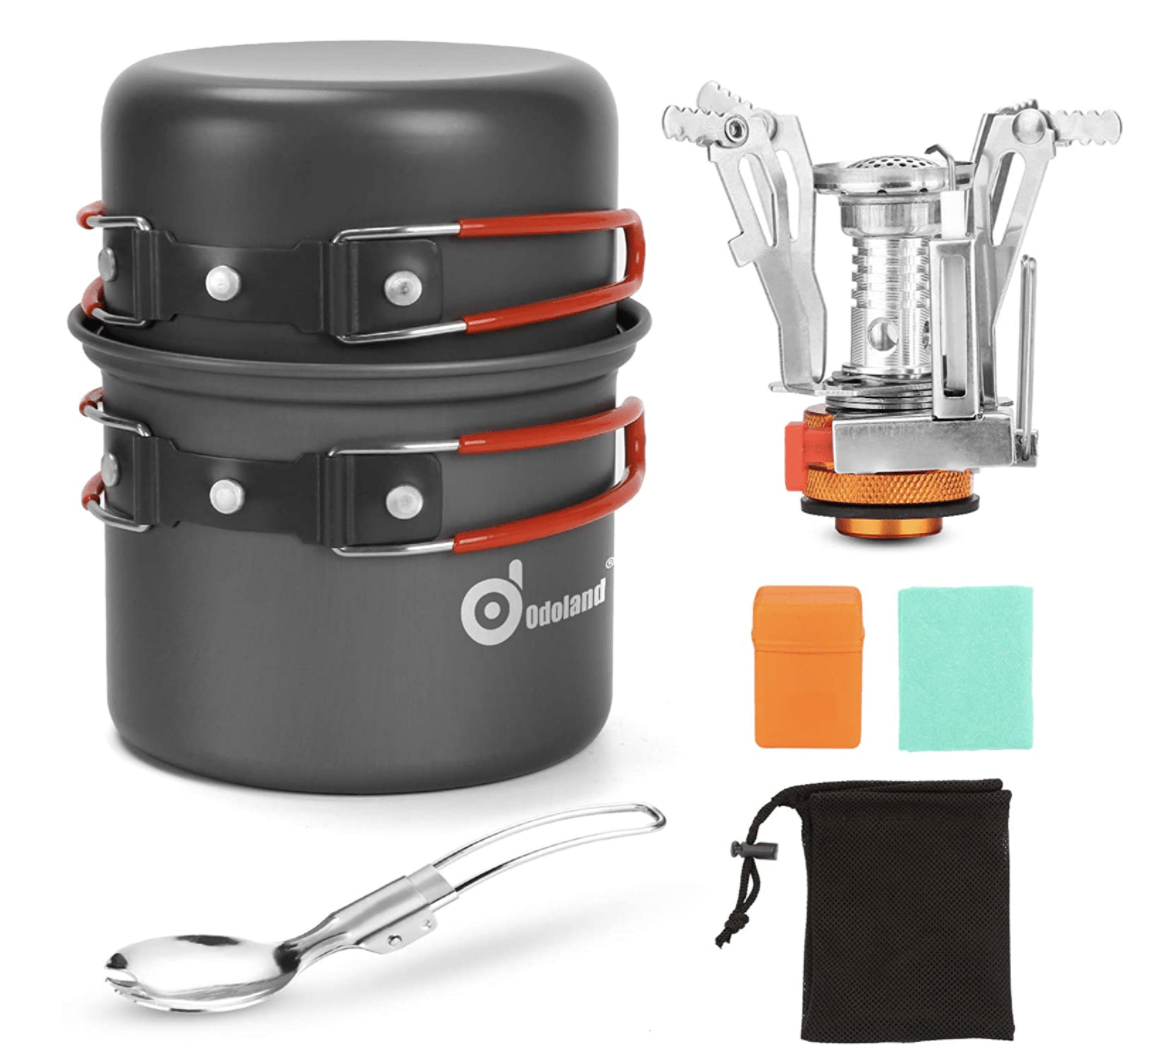 Amazon Prime Day Summer Deals - Camping Cookware